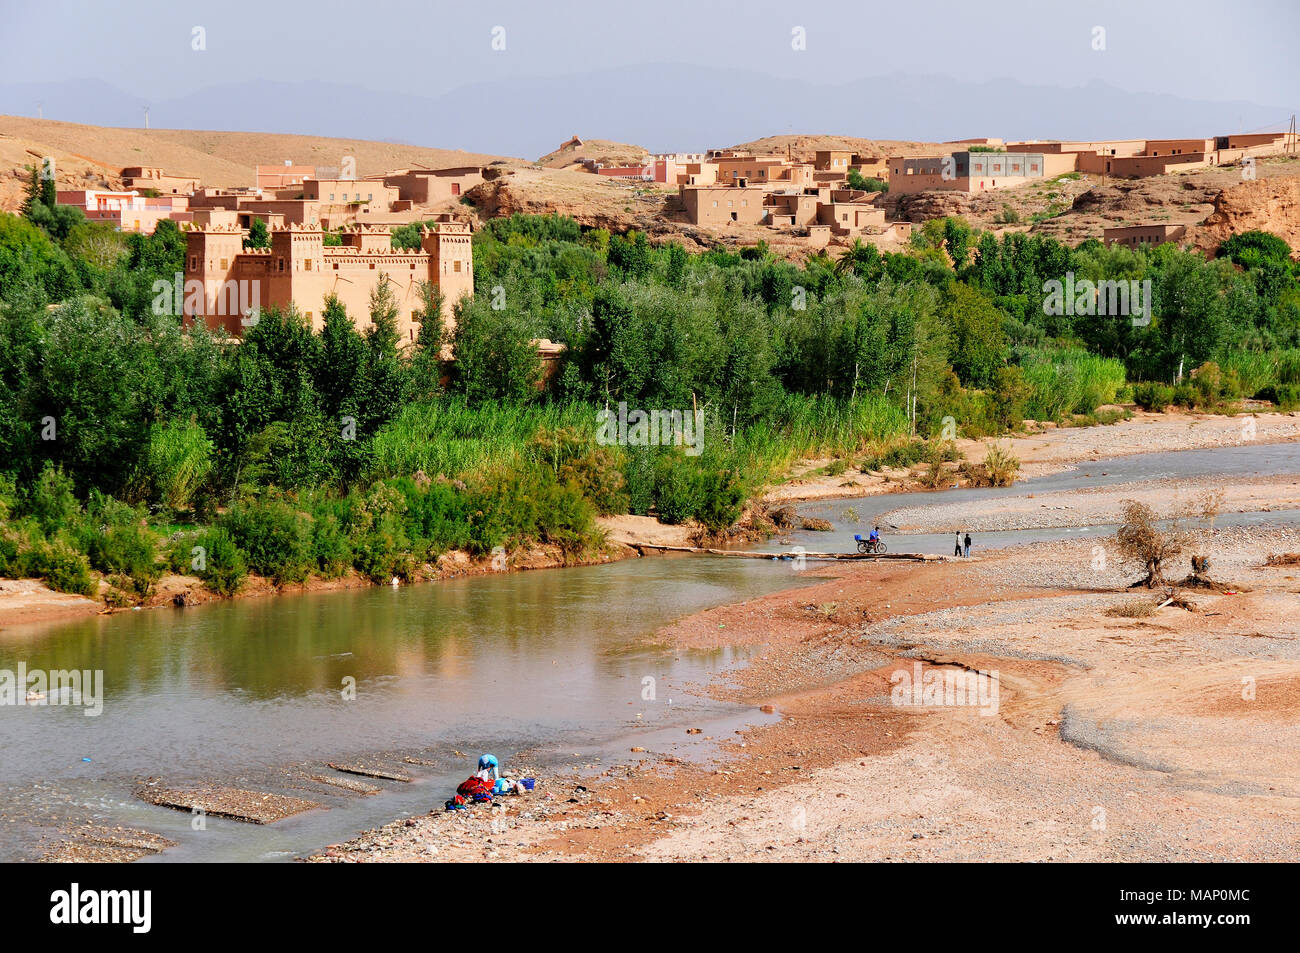 The oasis town of Kelaa M'Gouna famous for its roses. Morocco Stock Photo